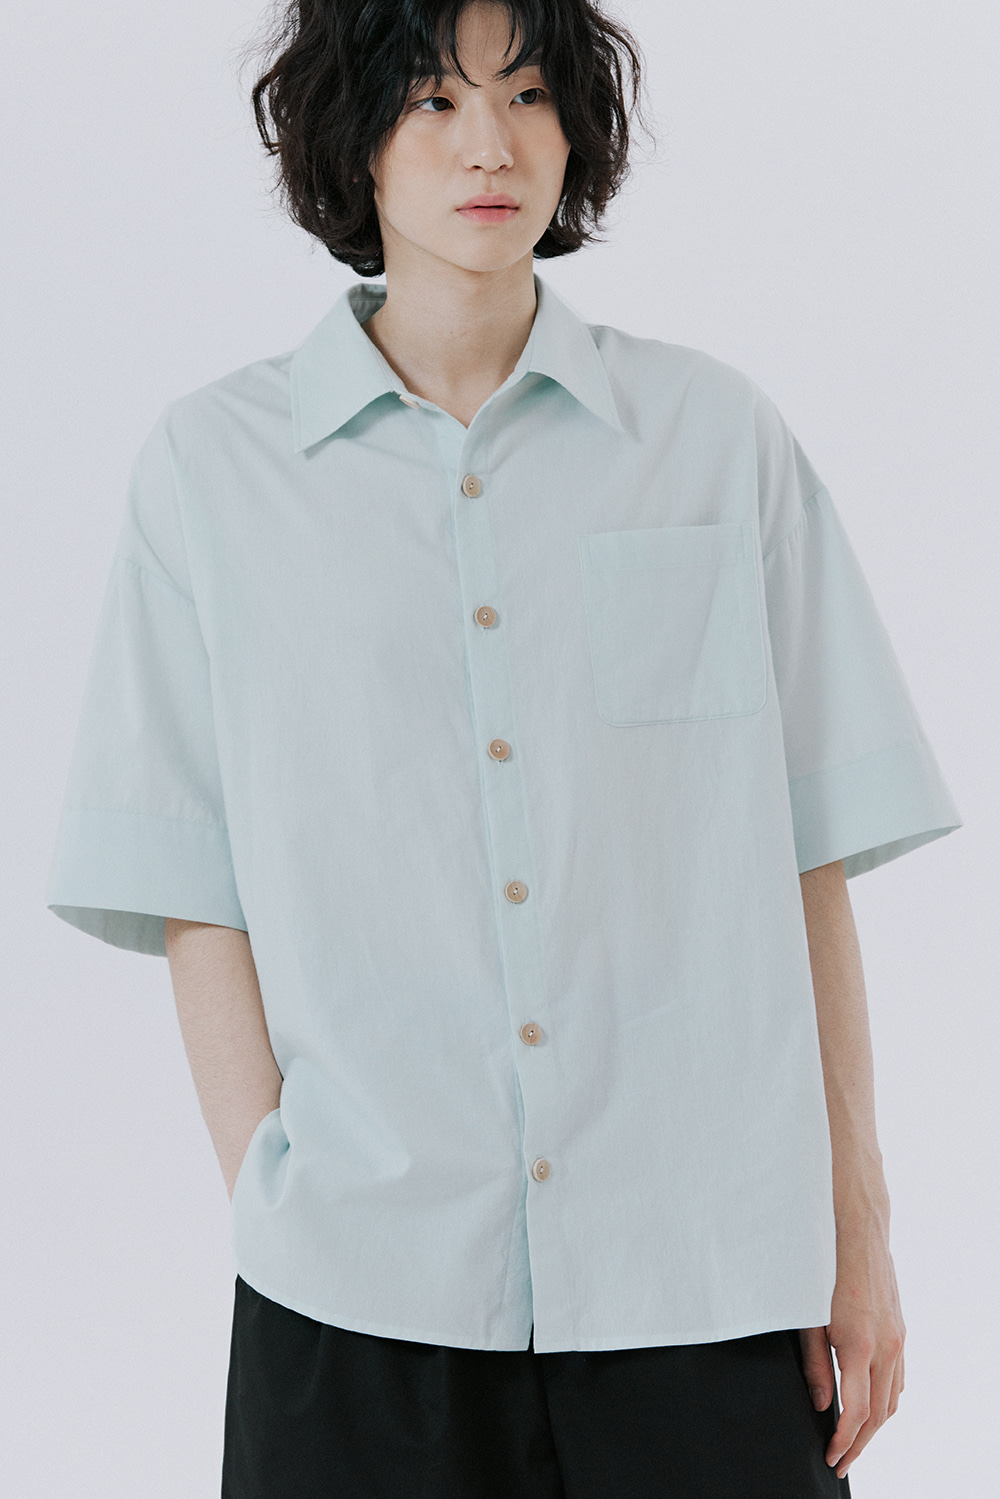 unisex cuffs shirts skyblue [4color]